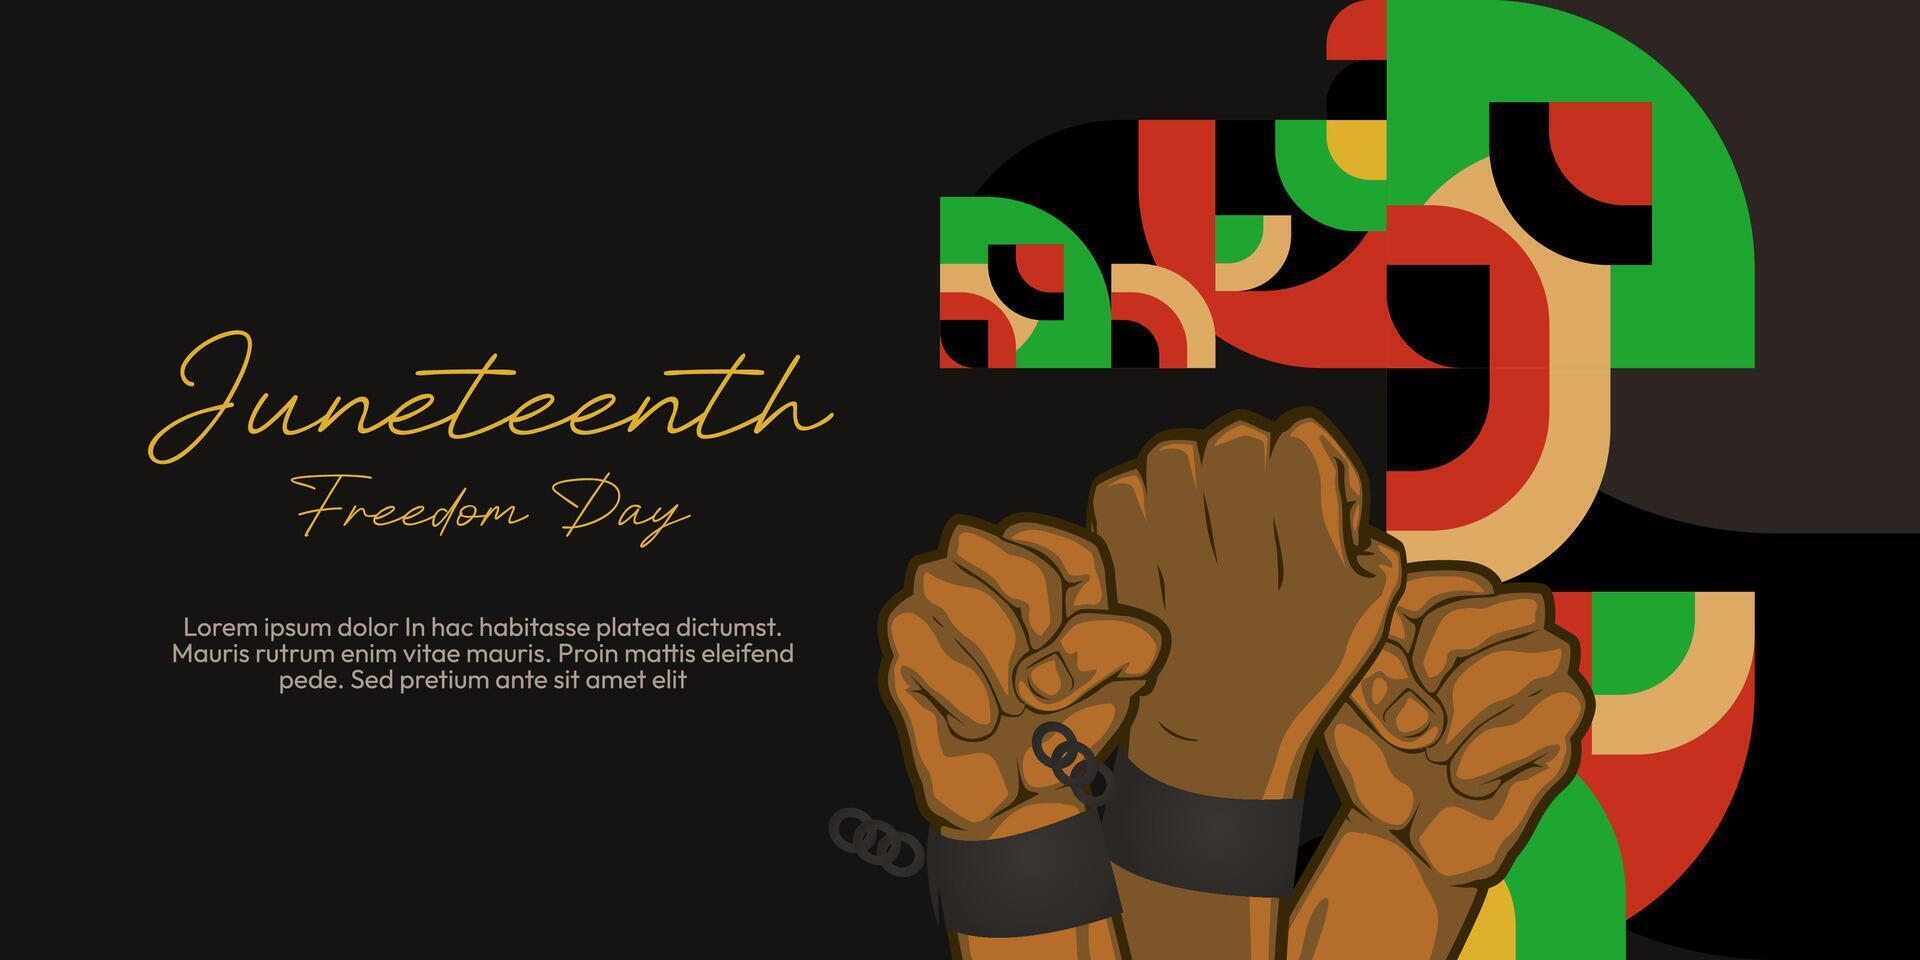 Juneteenth freedom day banner. African American Freedom Day to celebrate. Abstract background with geometric design for Juneteenth Freedom day vector